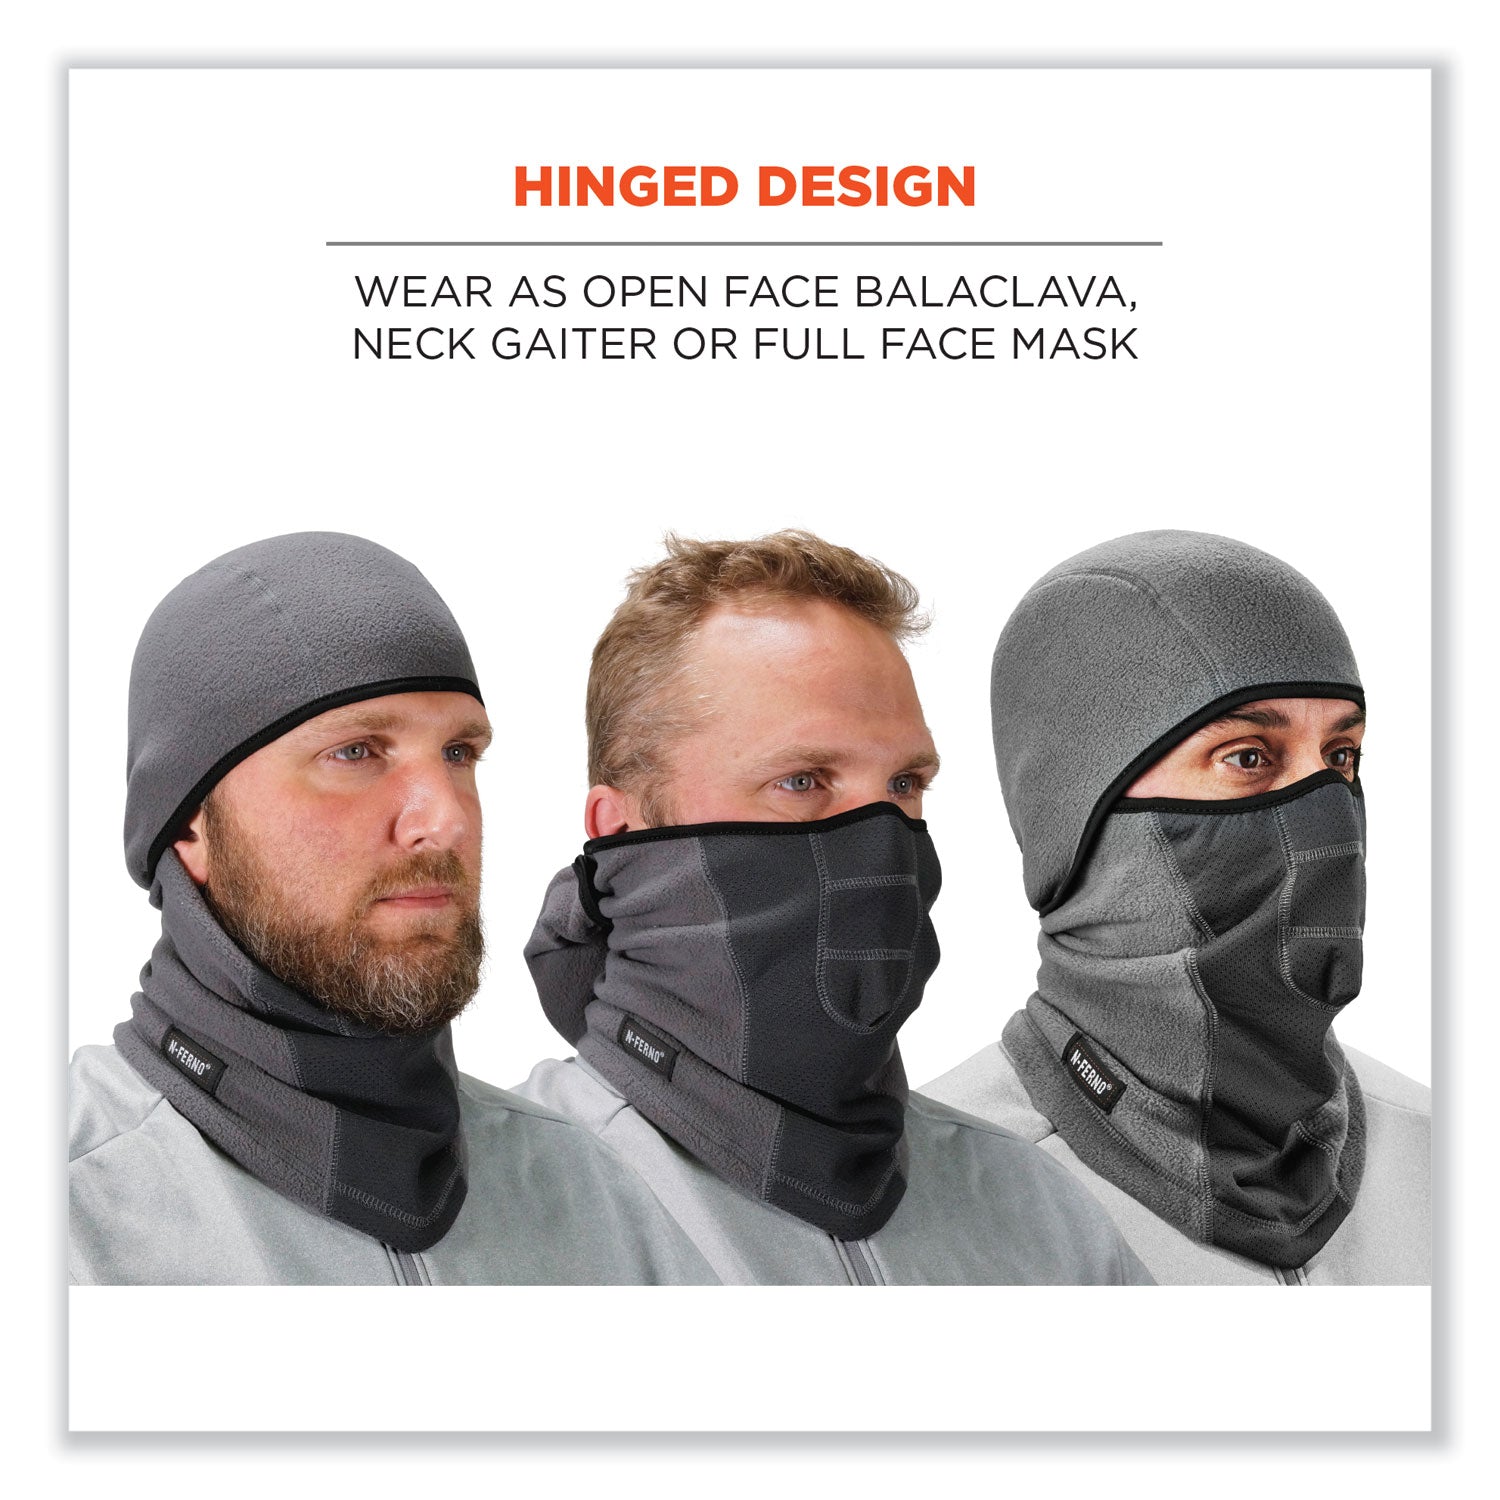 n-ferno-6823-hinged-balaclava-face-mask-fleece-one-size-fits-most-gray-ships-in-1-3-business-days_ego16835 - 6